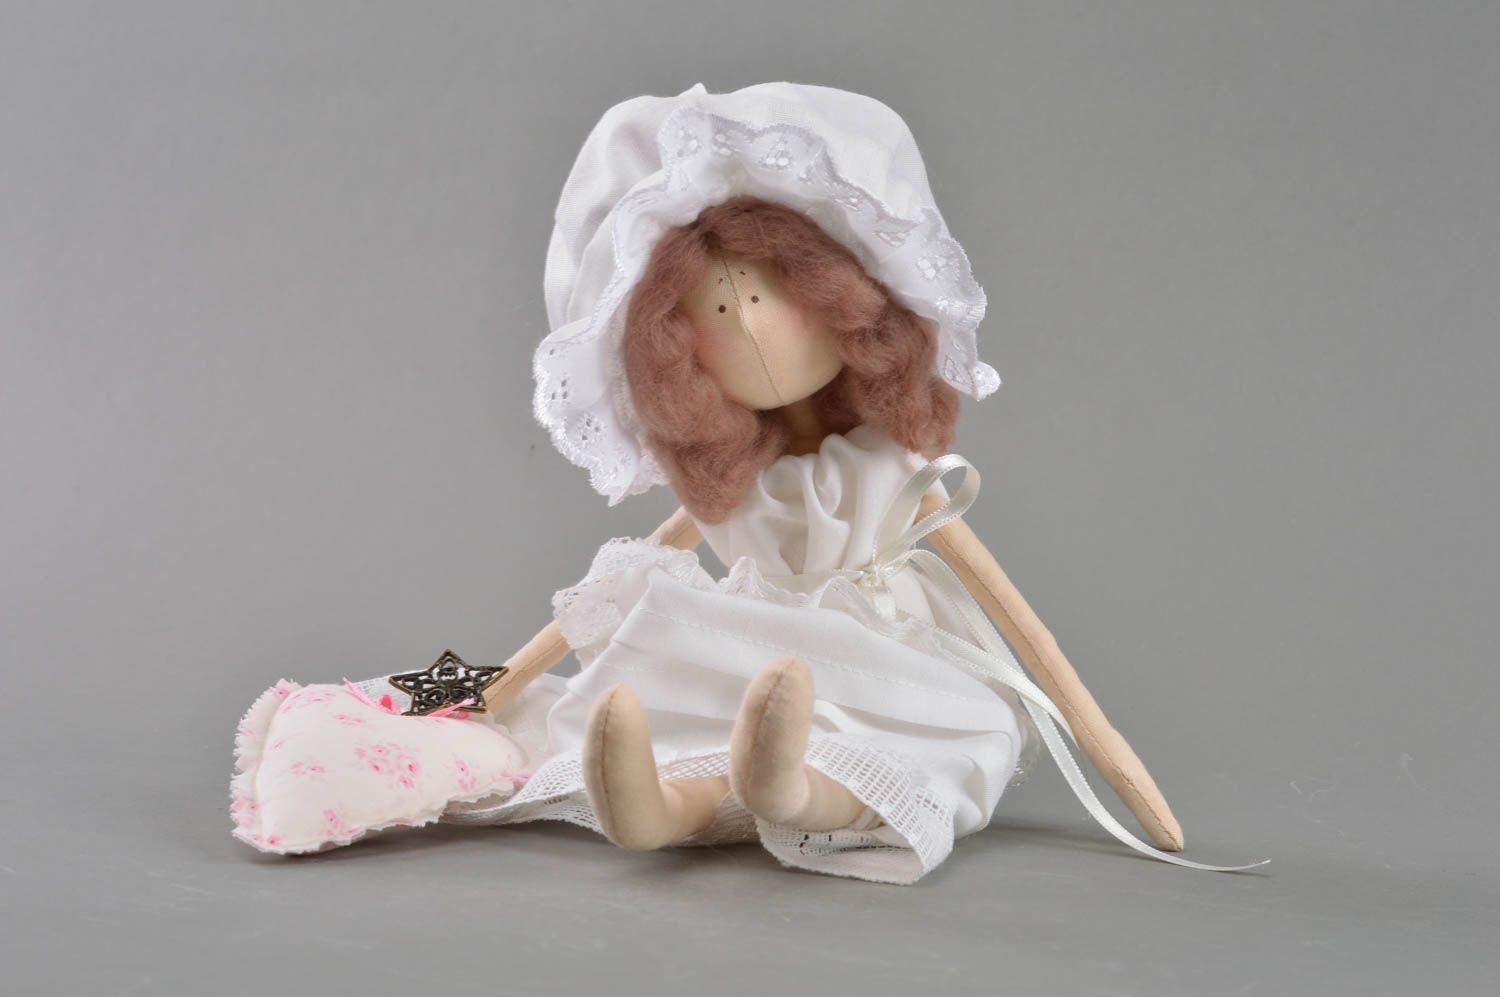 Handmade cute toy doll made of fabric in white dress and bonnet on stand photo 4